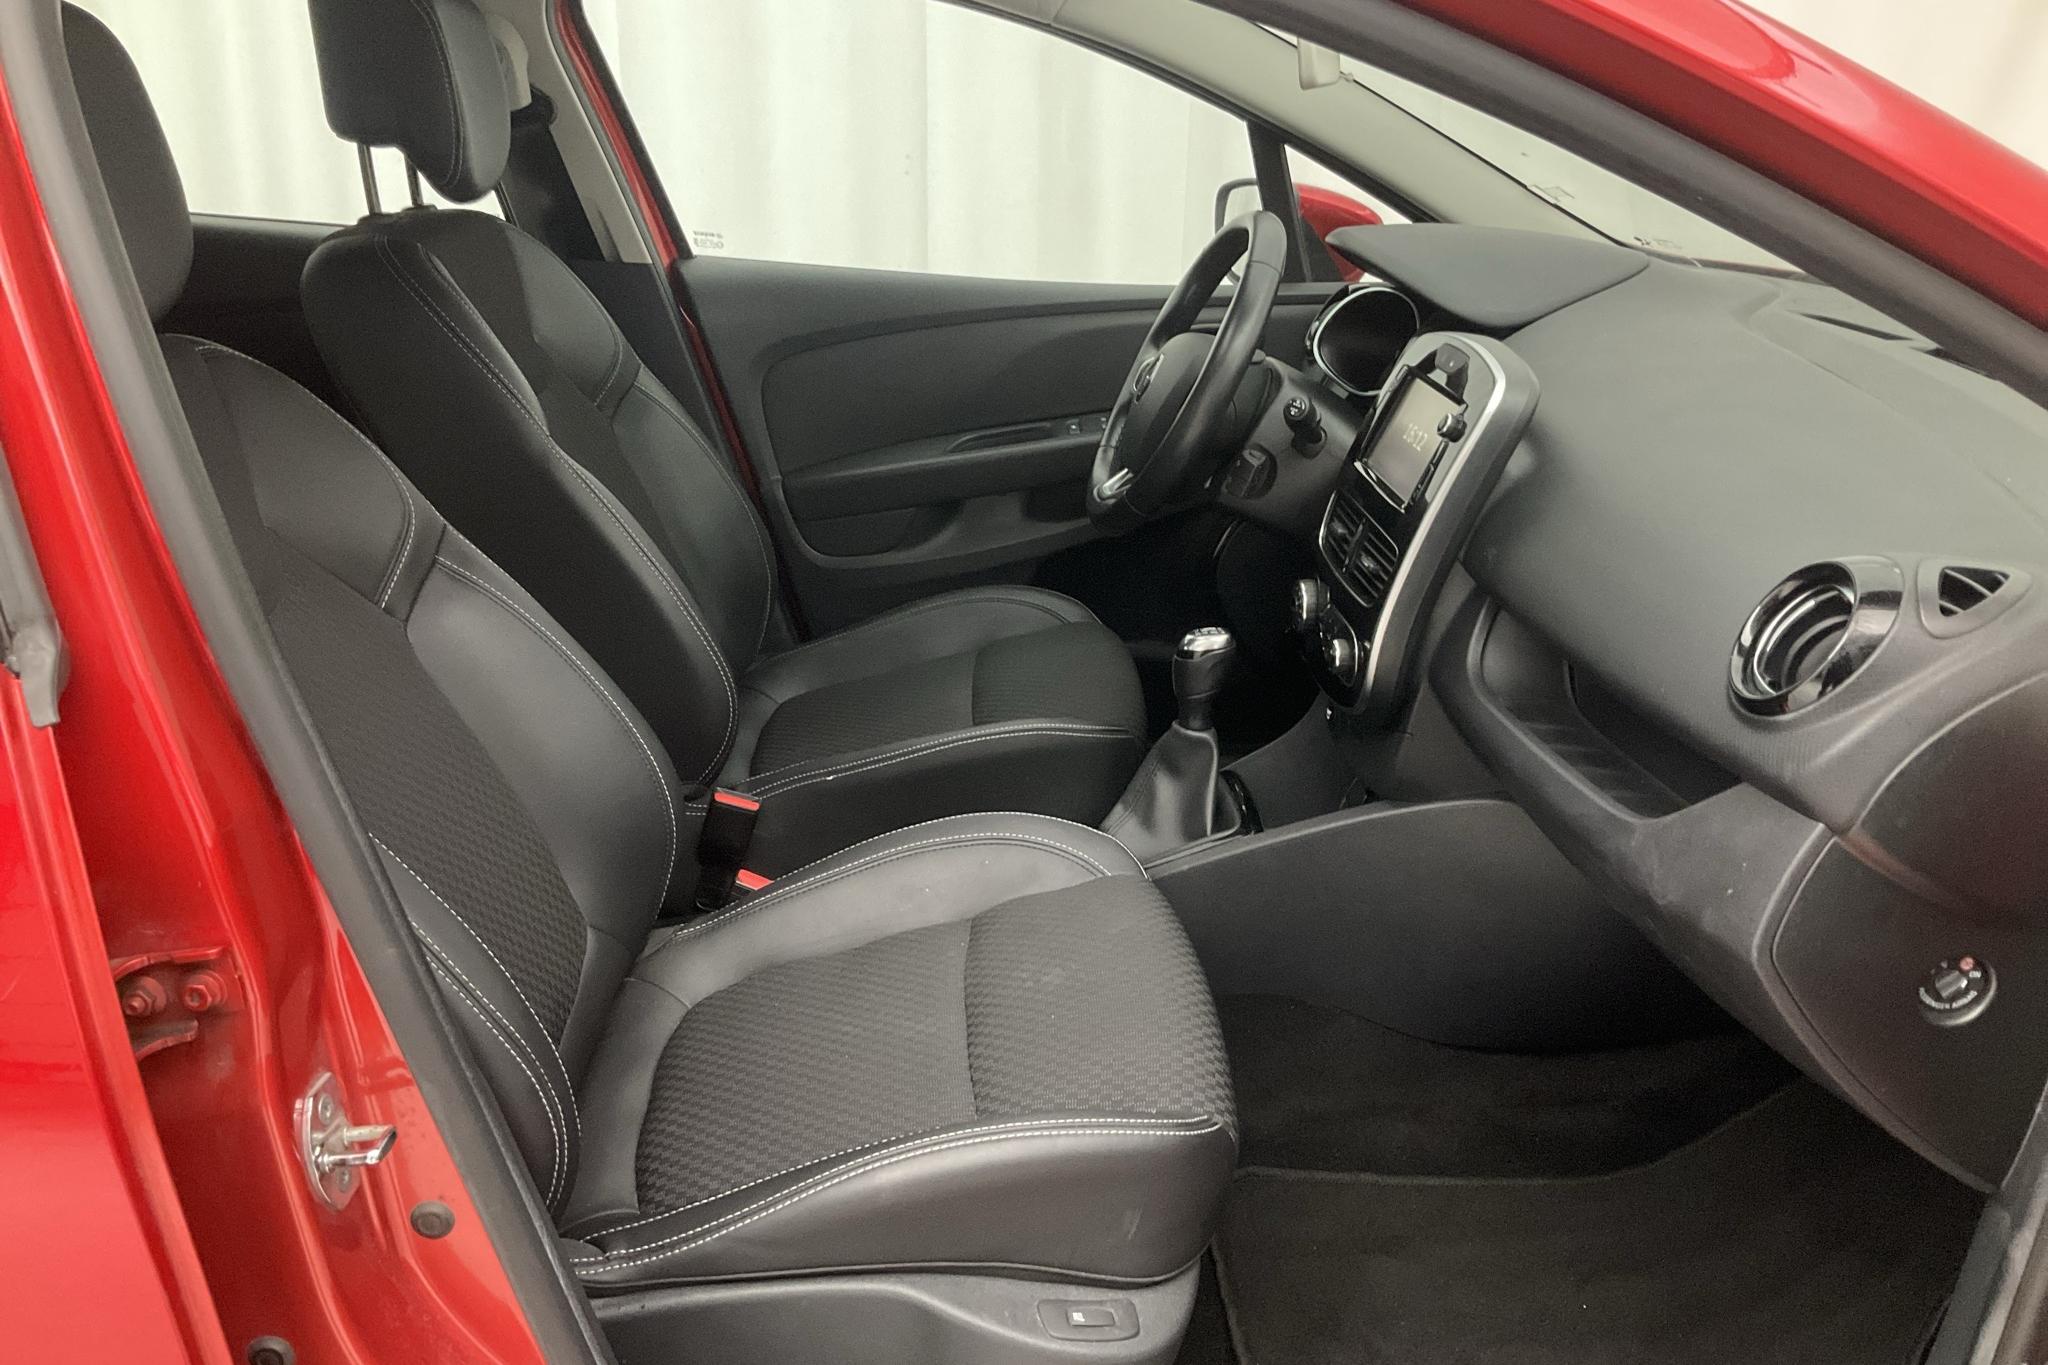 Renault Clio IV 0.9 TCe 90 5dr (90hk) - 67 030 km - Manual - red - 2018